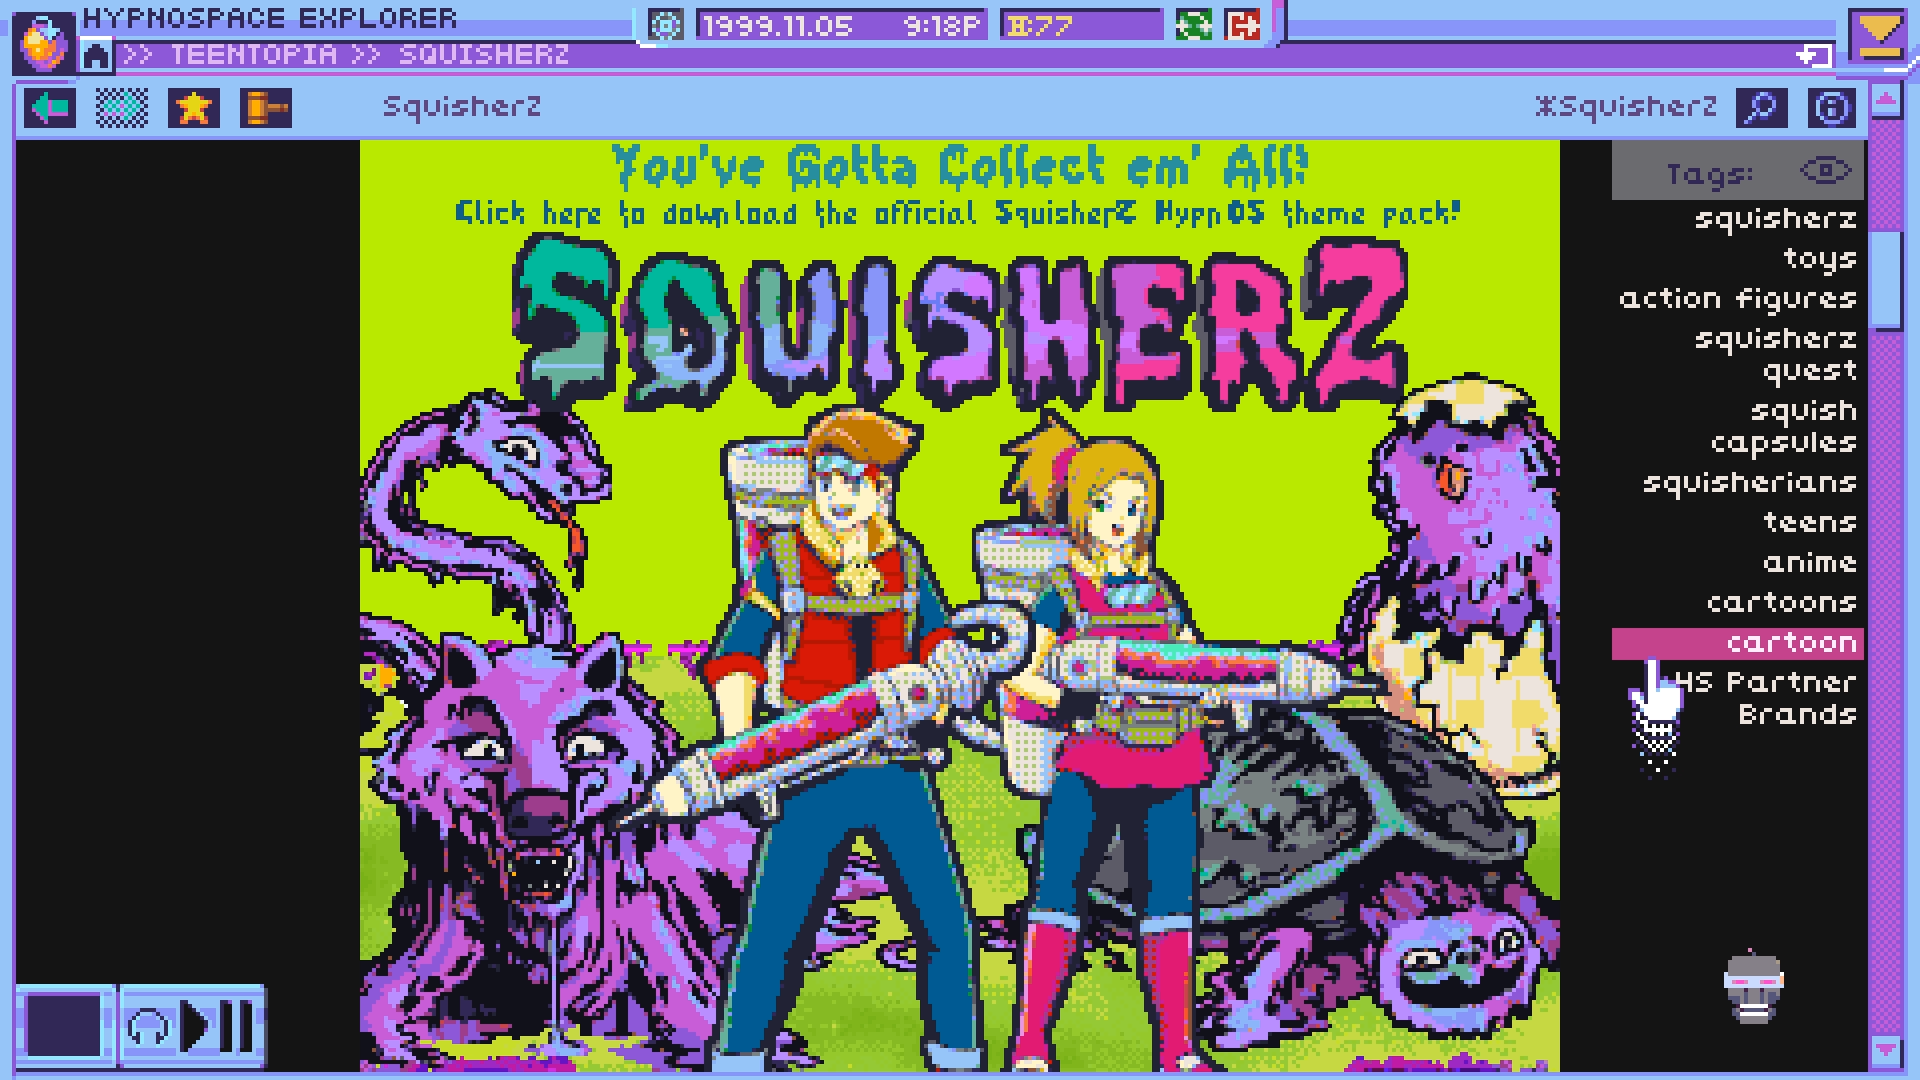 Hypnospace Outlaw 90 S Internet Simulator Revealed By No More Robots And Tendershoot Gaming Cypher